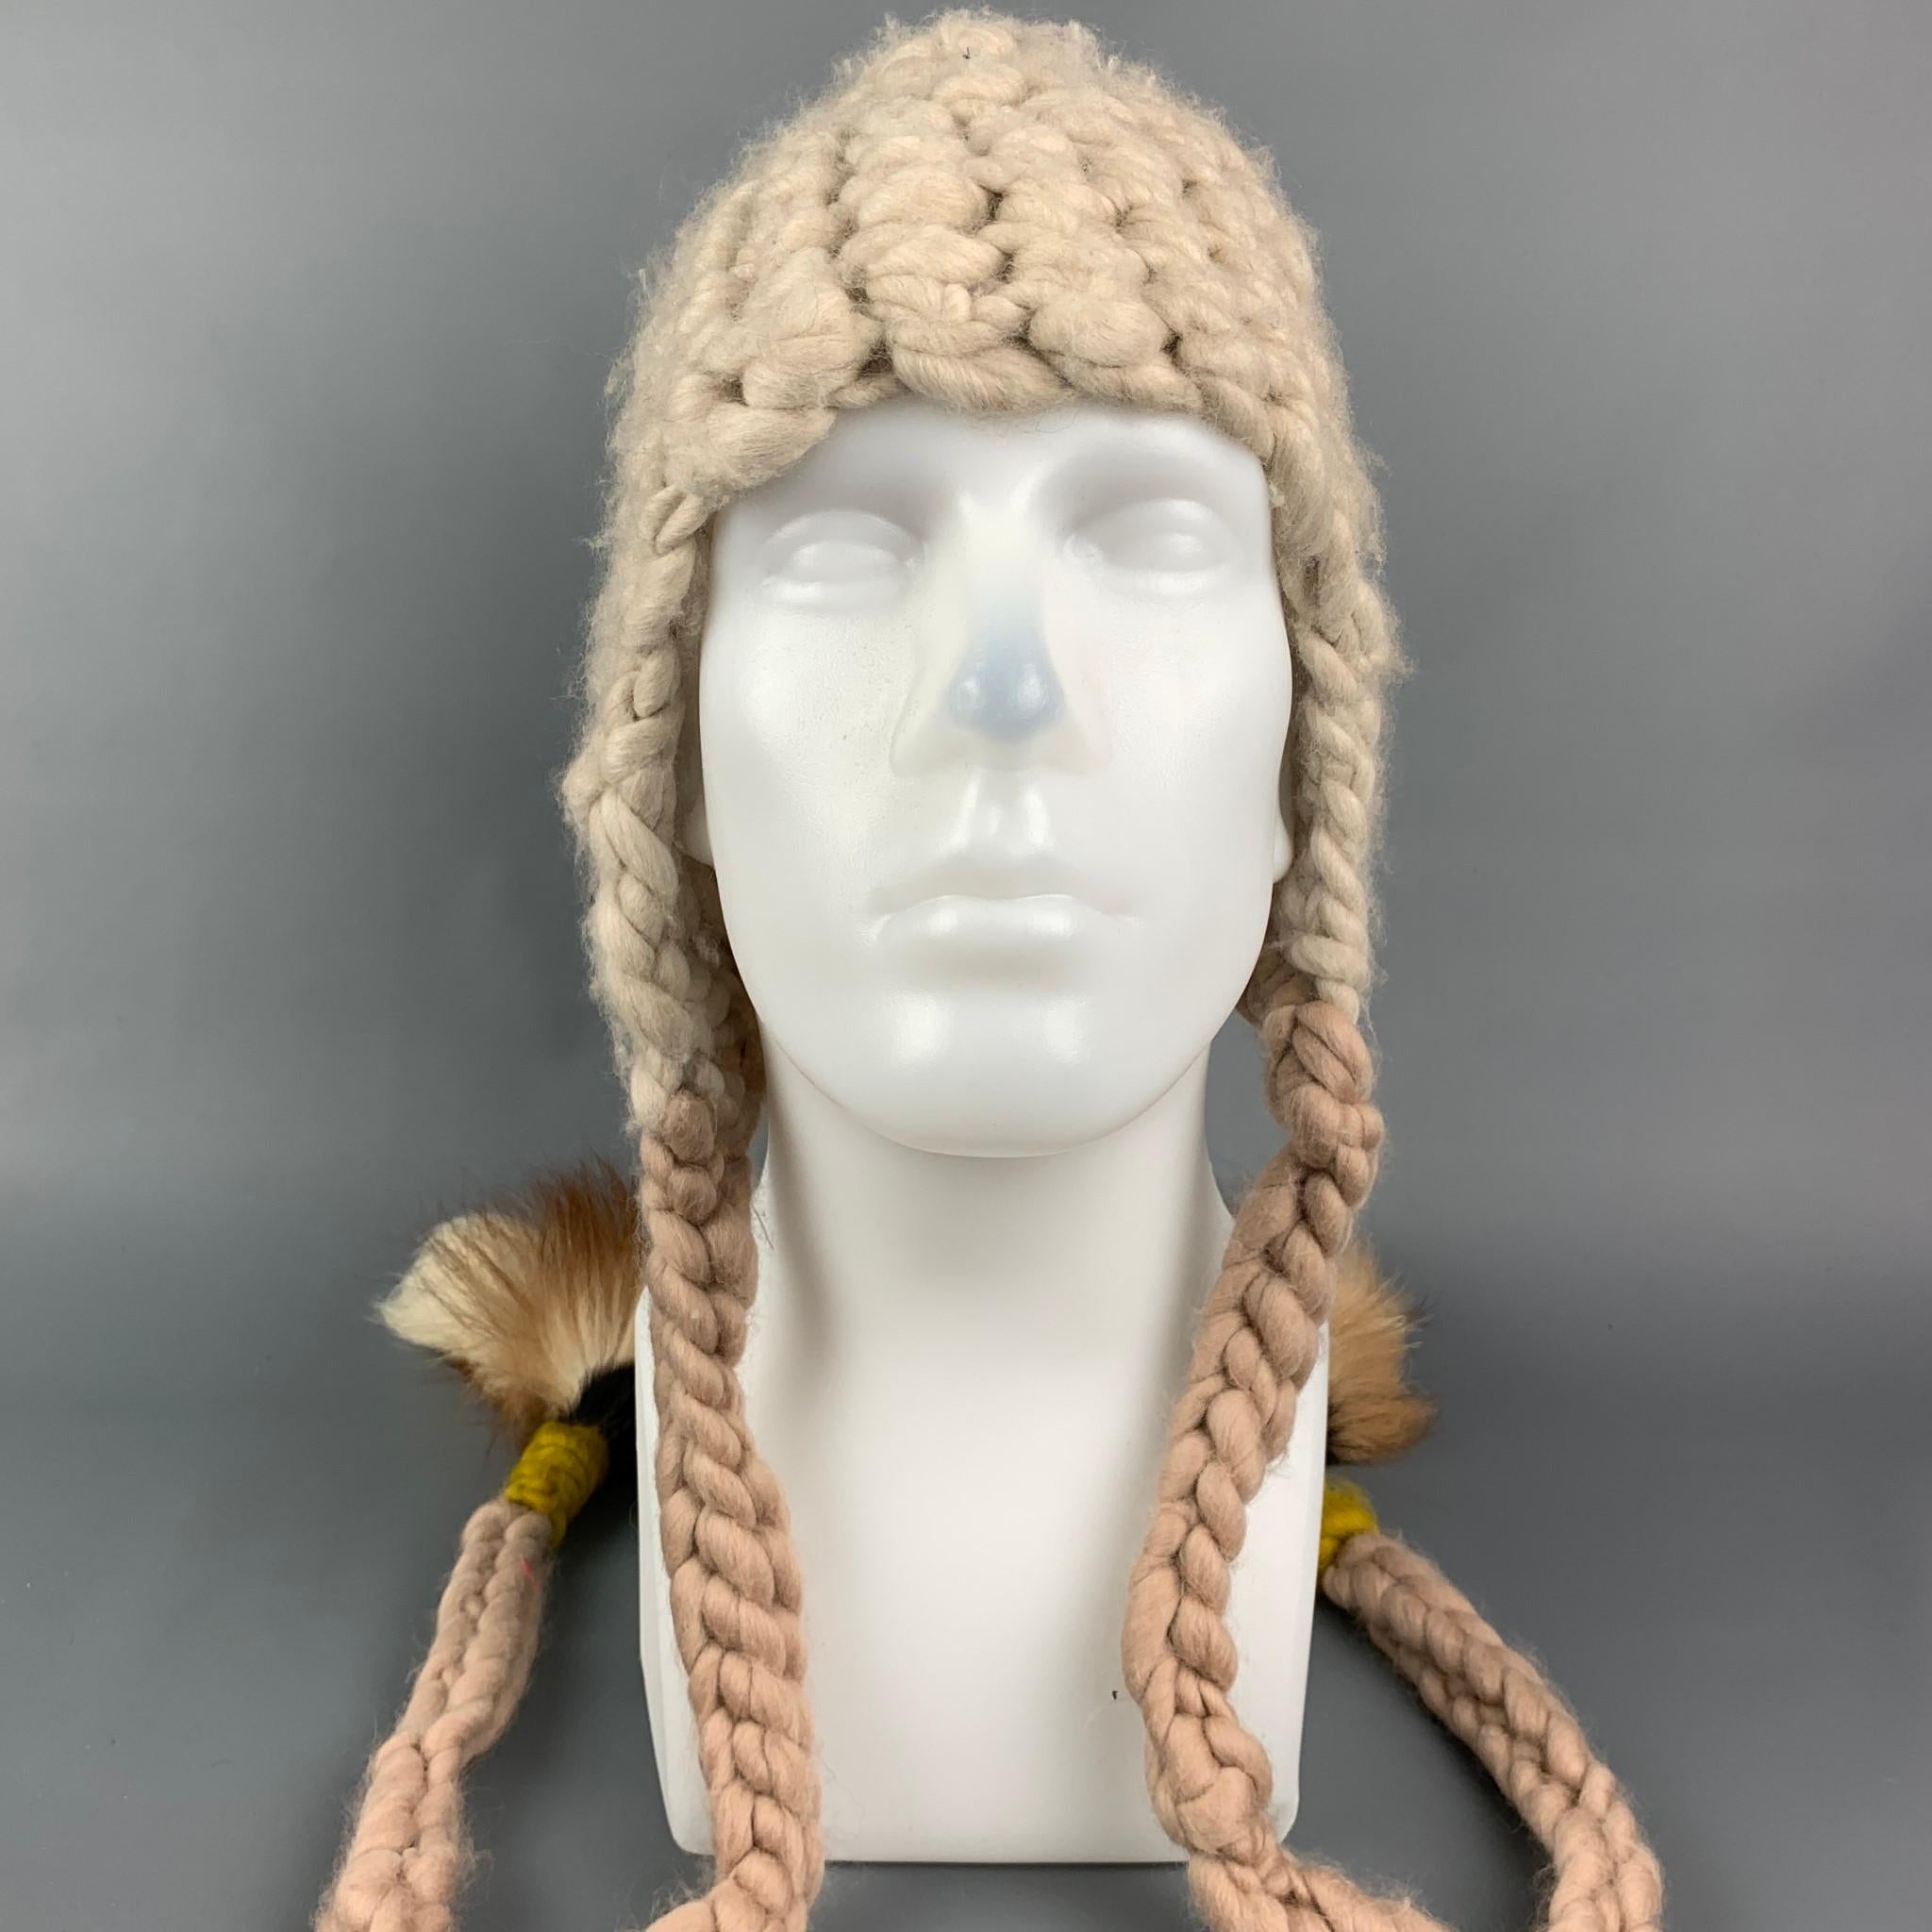 MISCHA LAMPERT hat comes in a cream knitted wool featuring a chunky style and two tail design. Made in USA. 

Very Good Pre-Owned Condition.
Marked: Size tag removed.
Original Retail Price: $260.00

Measurements:

Opening: 20 in.
Height: 10 in. 